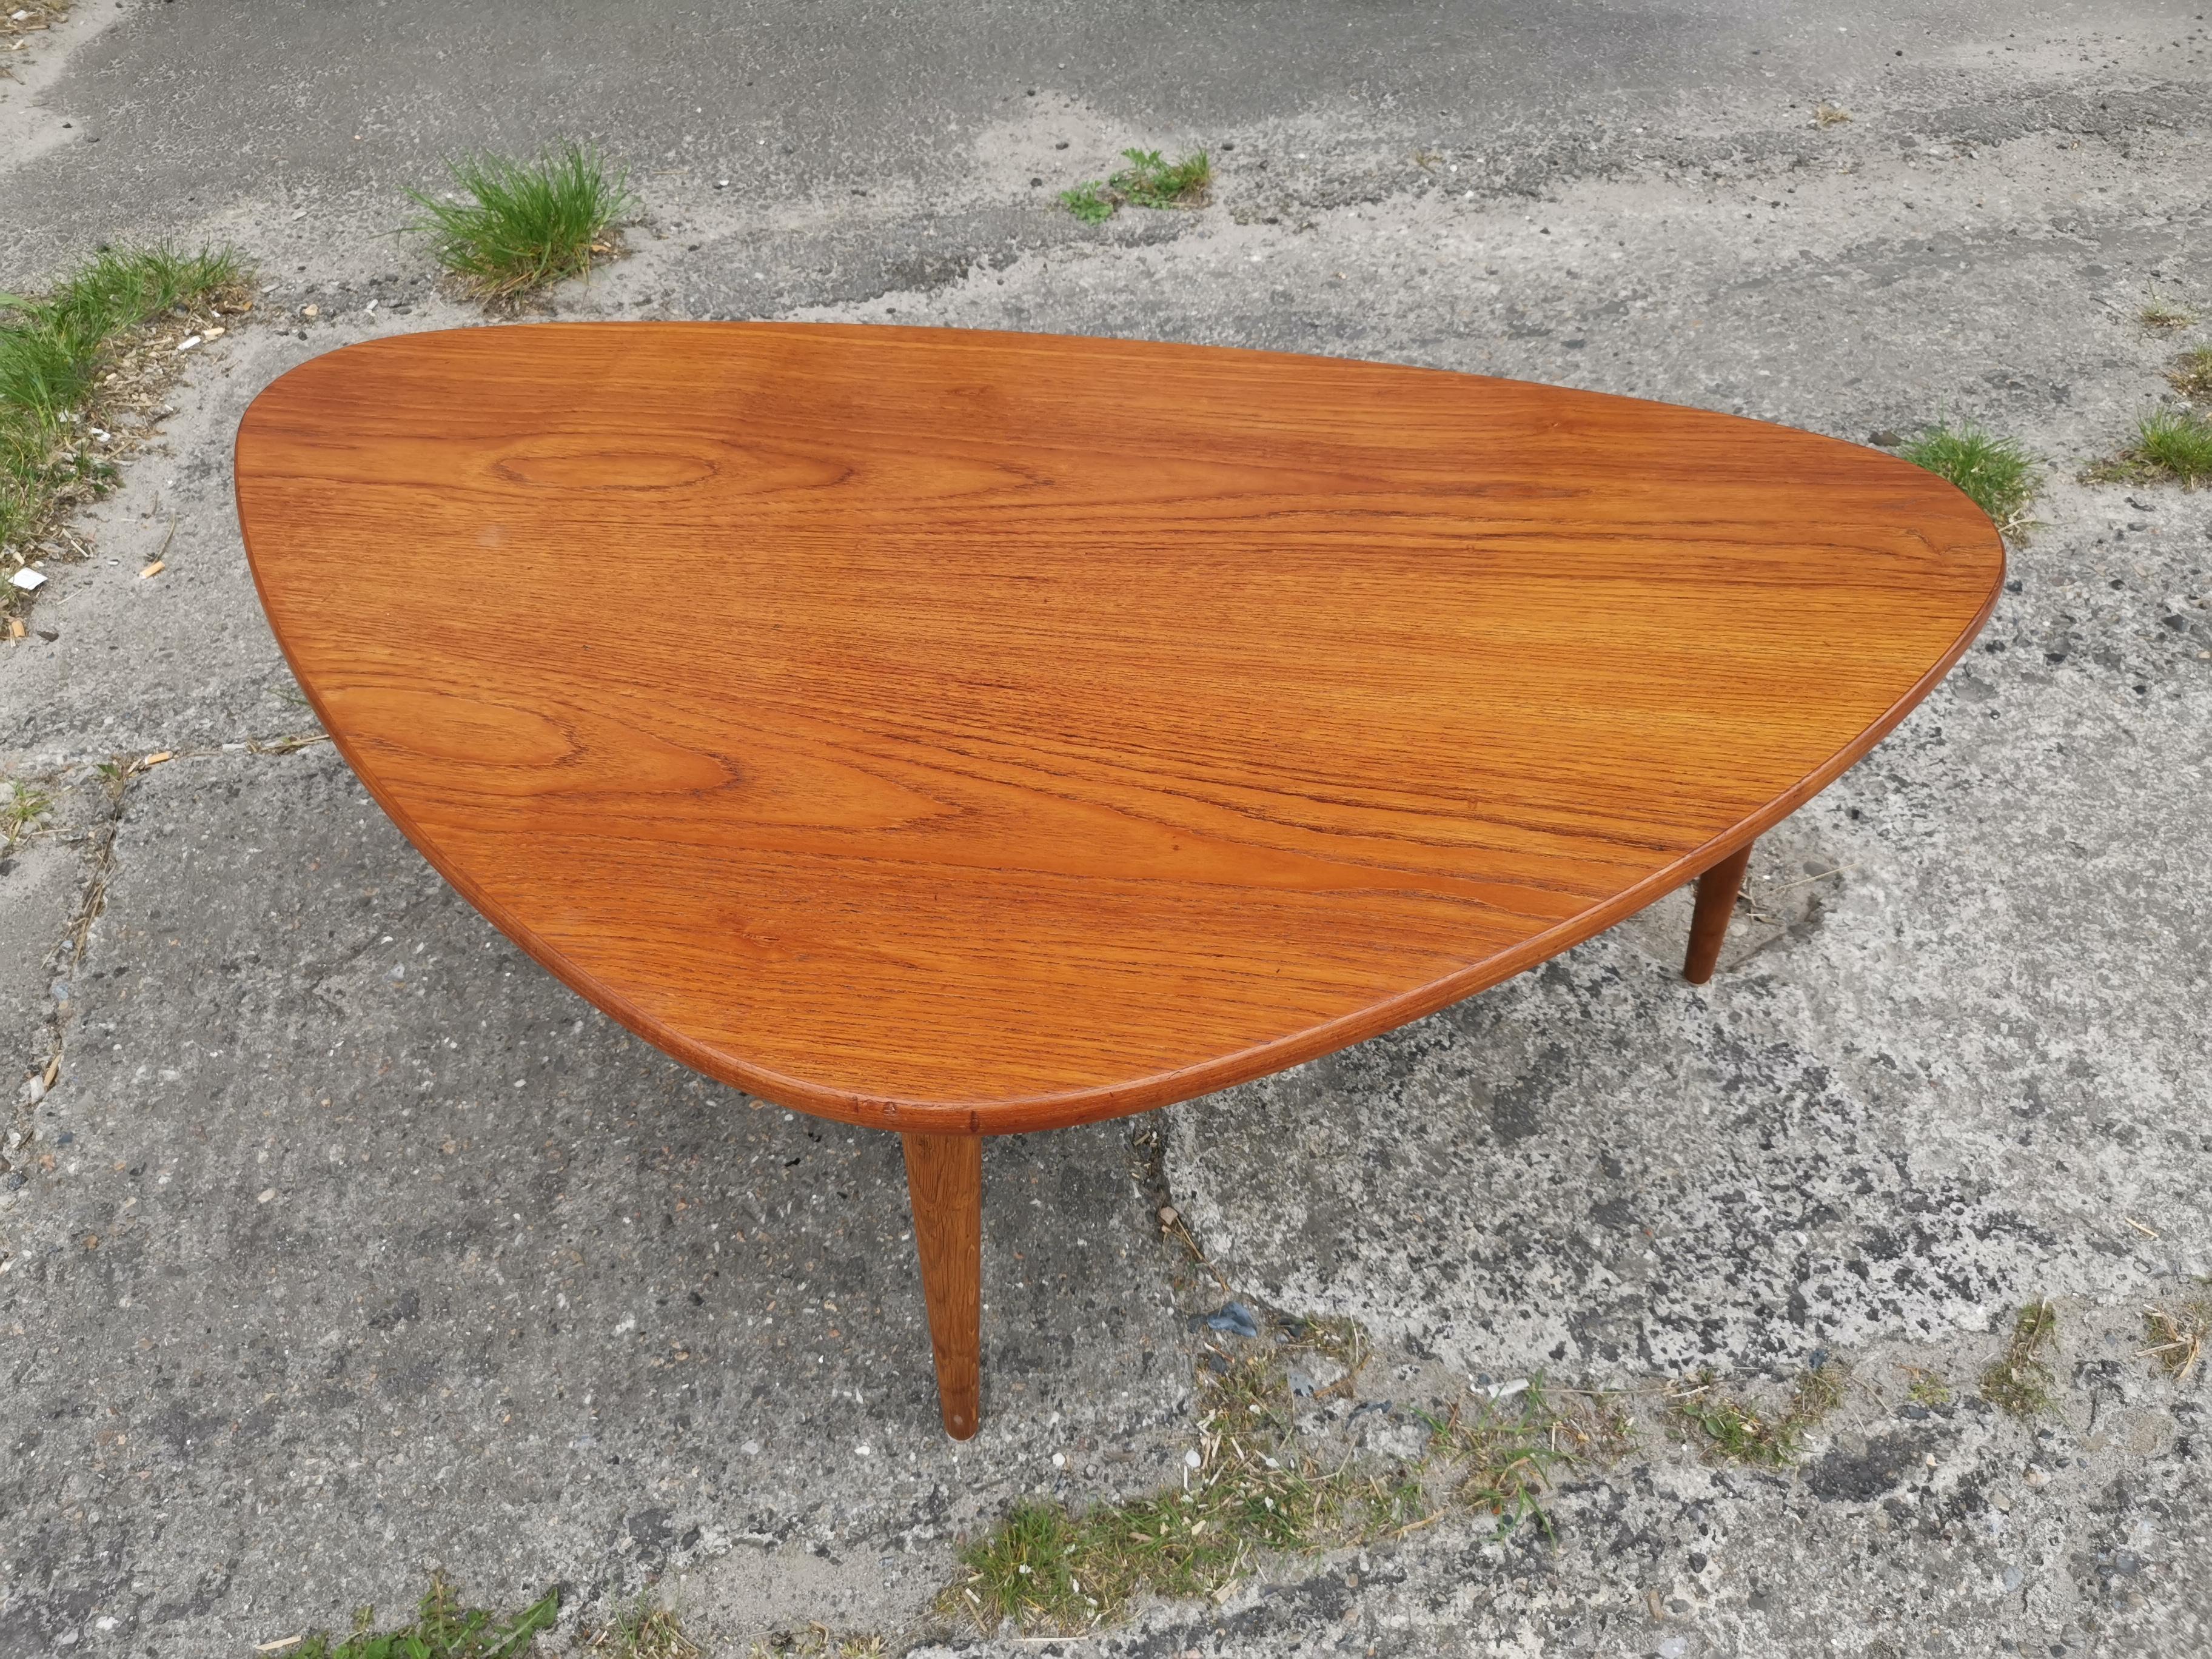 Beautiful Danish Mid-Century Modern coffee table manufactured in the 50s by Anton Kildeberg Møbelfabrik designed by Anton Kildeberg. Structure in teak. In good vintage condition.